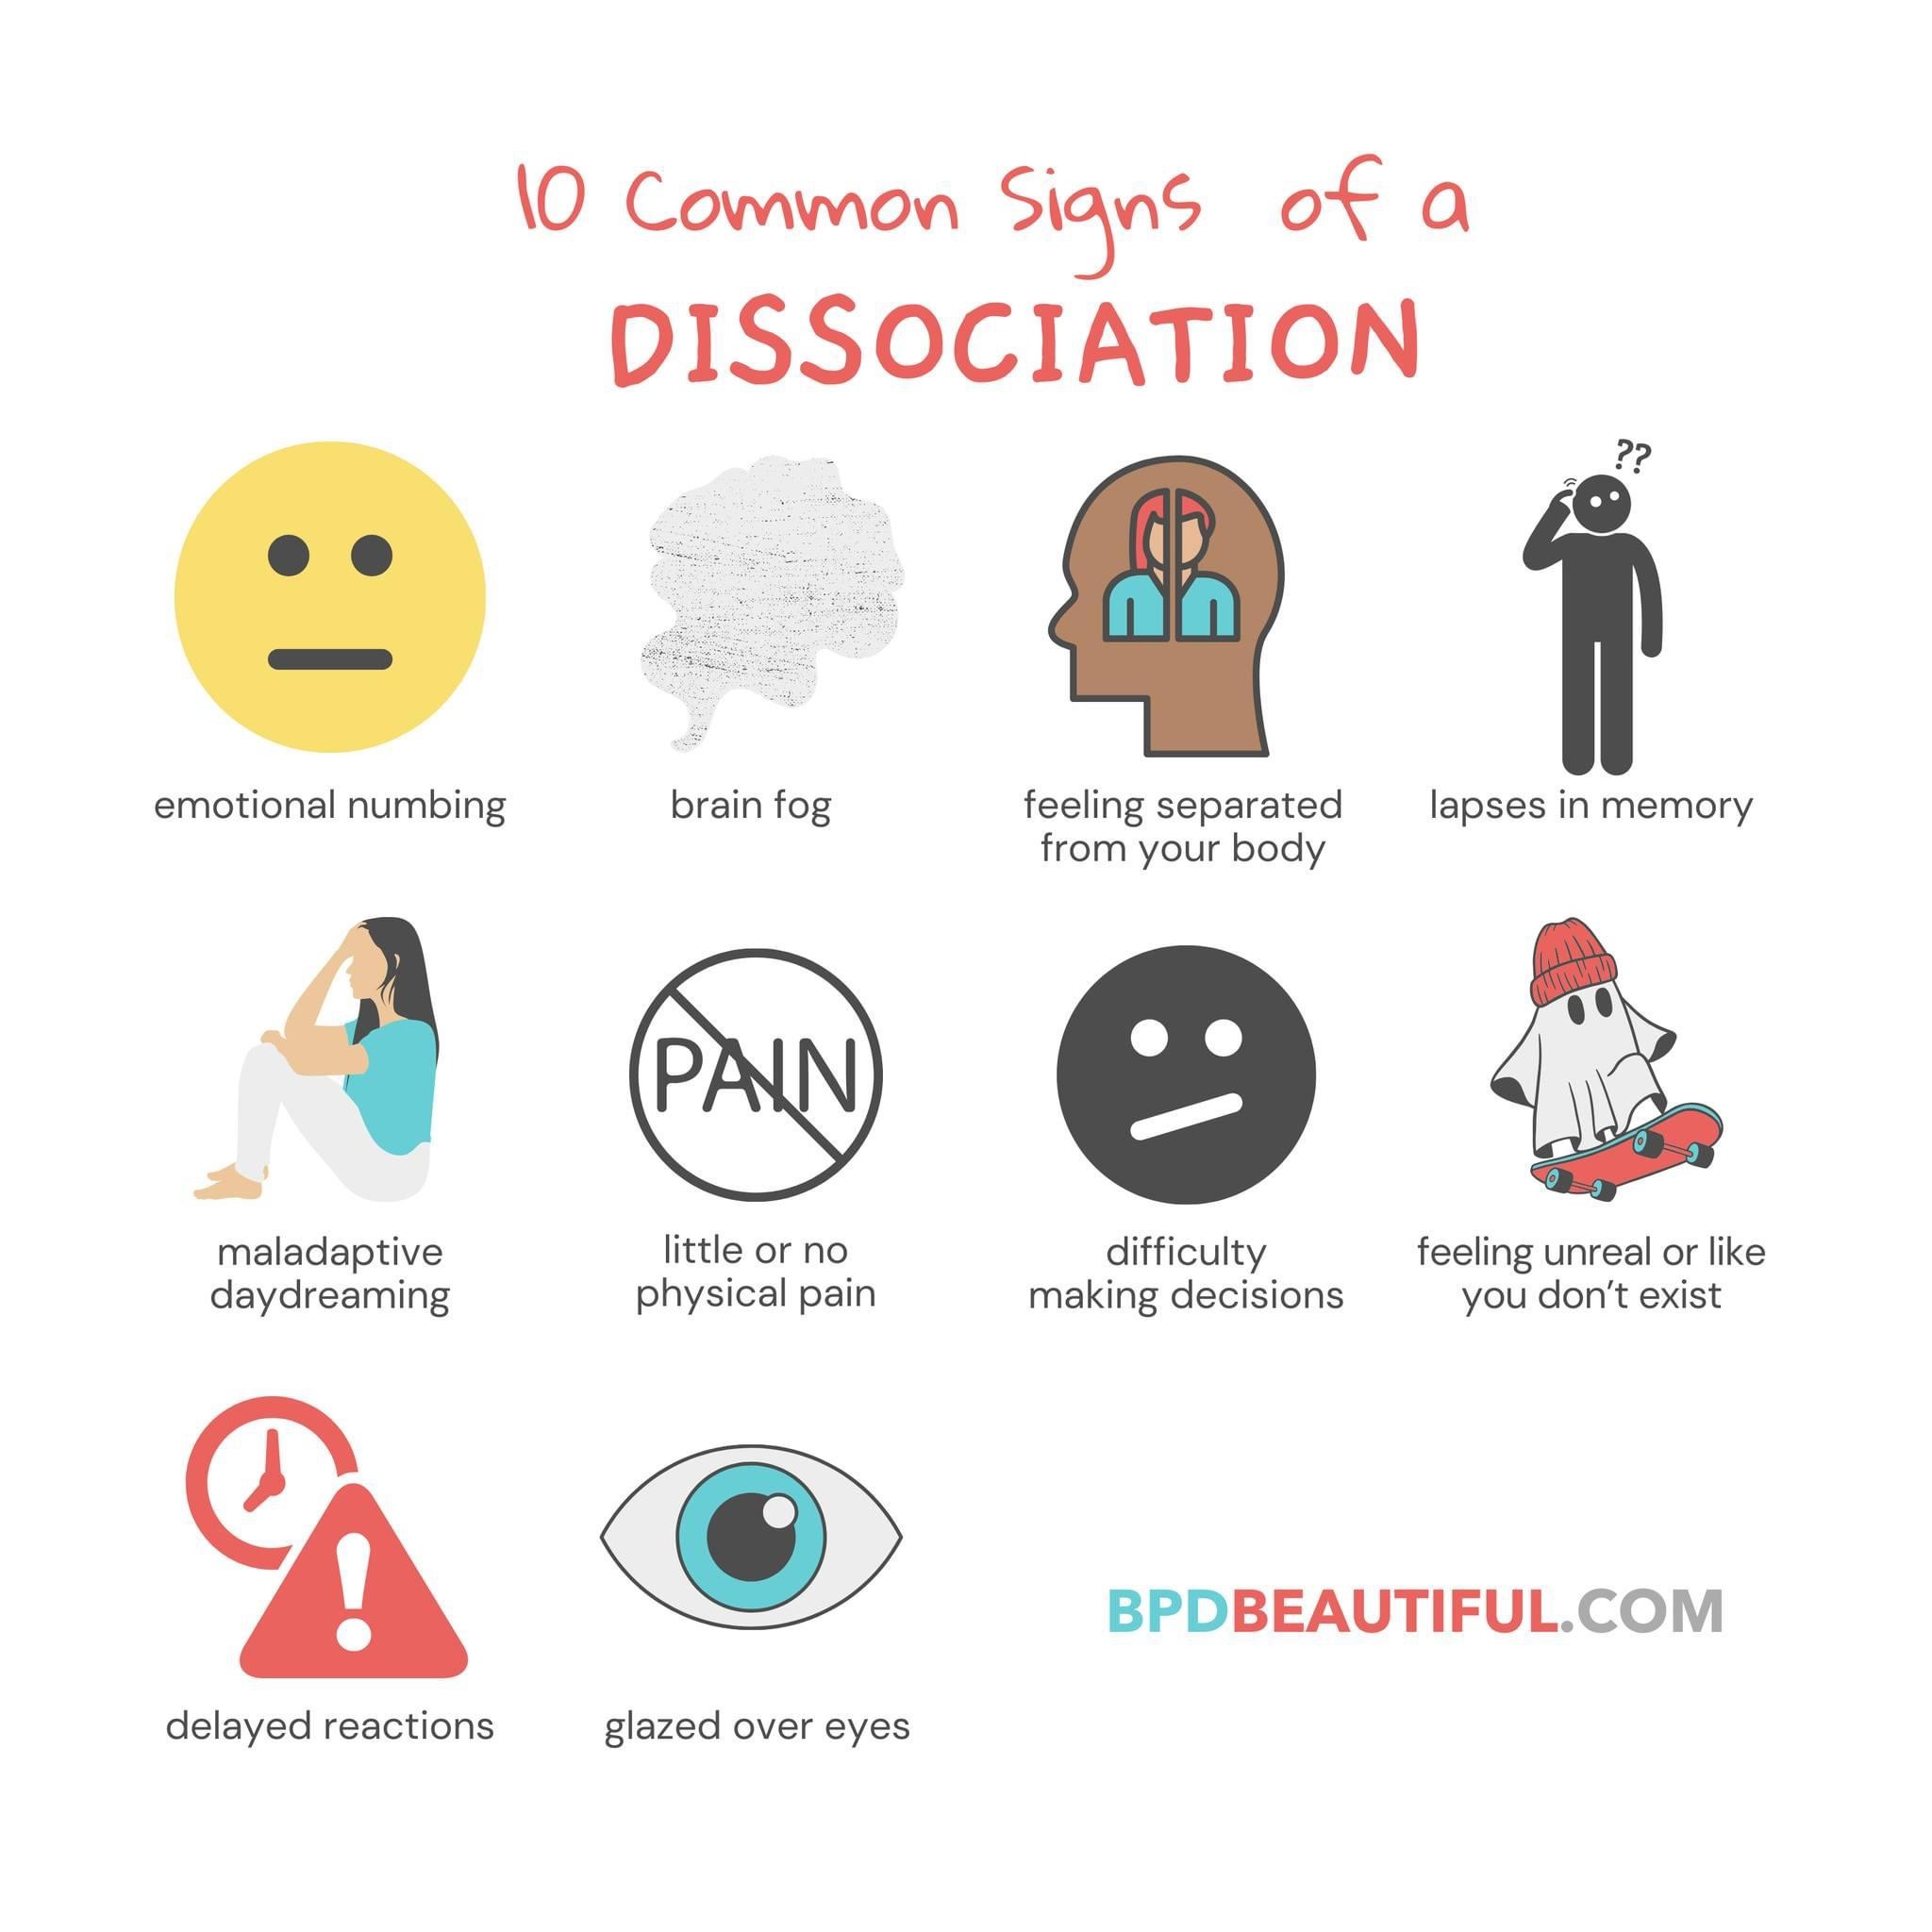 bpd dissociation 10 common signs. graphic from bpd beautiful's instagram